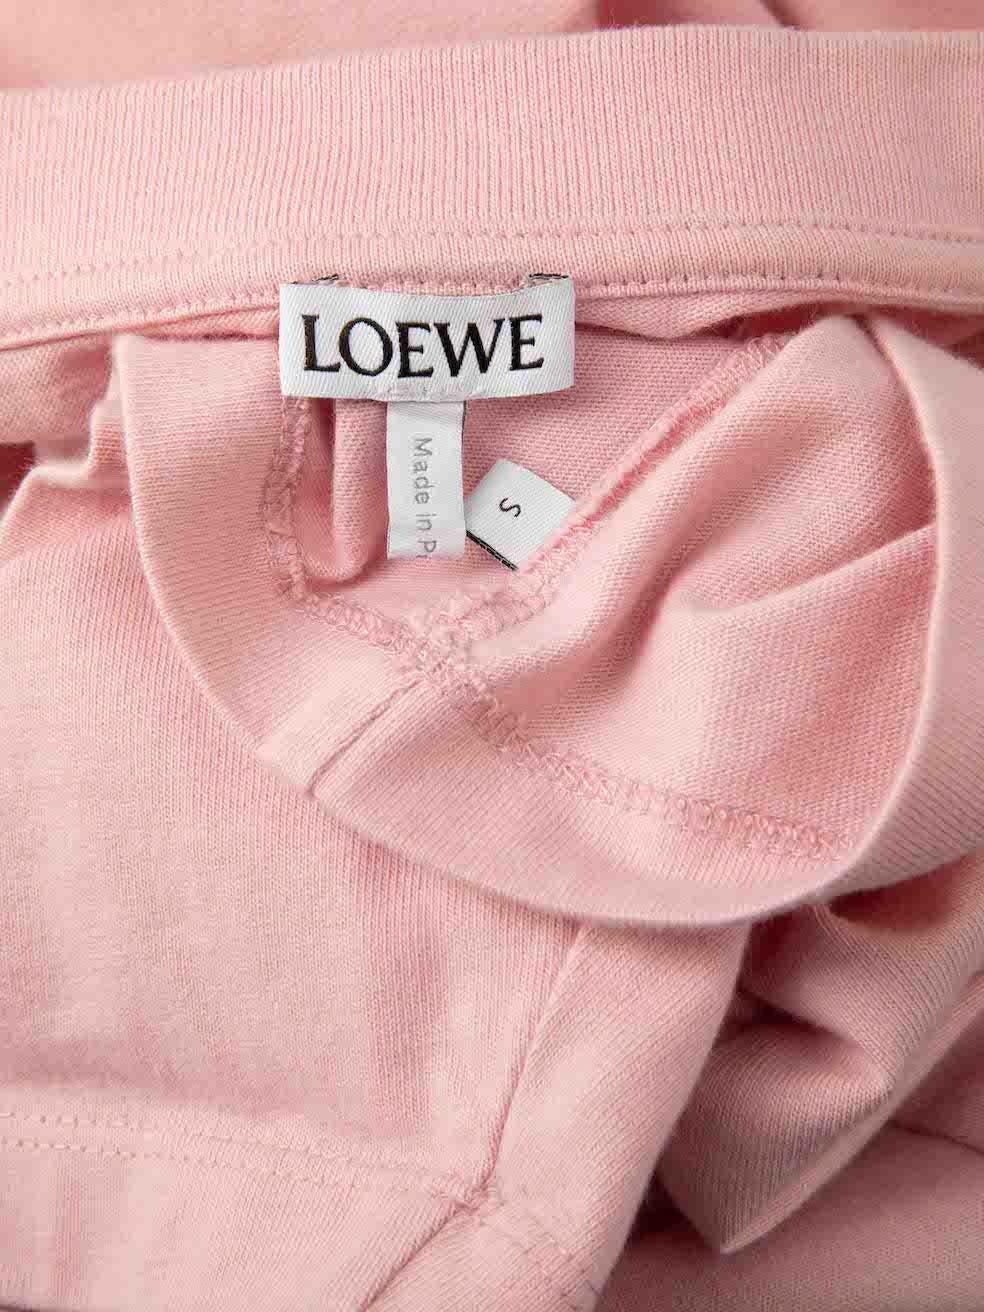 Loewe Pink Anagram Embroidered Cropped Top Size S For Sale 1